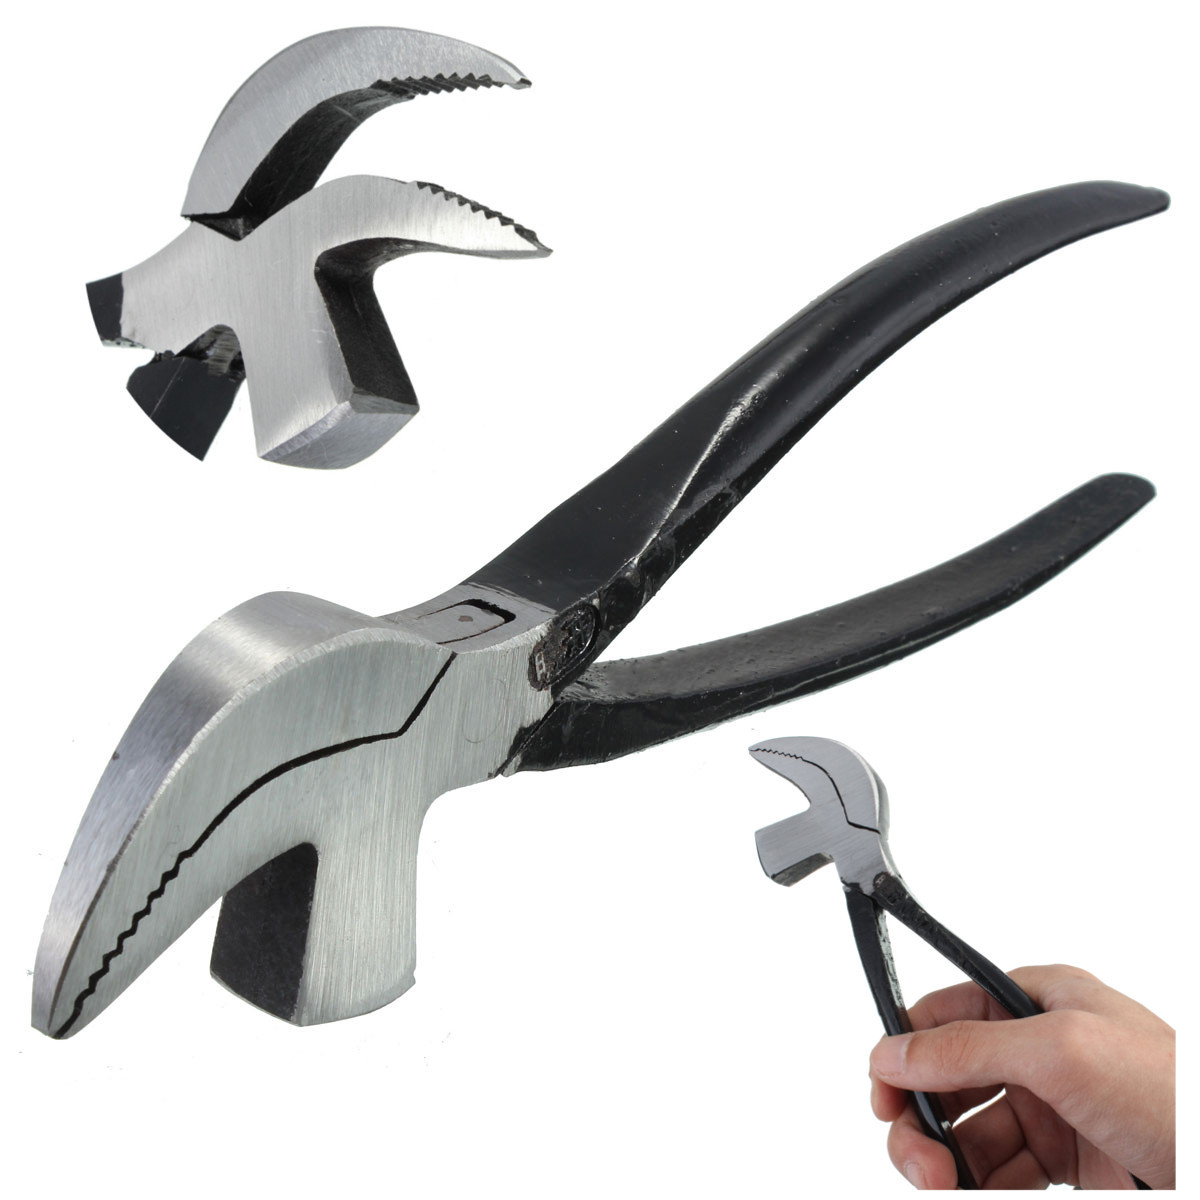 Metal-Cobbler-Pliers-Pincers-for-Shoemaking-Leather-Craft-Leather-DIY-Working-Tool-1021877